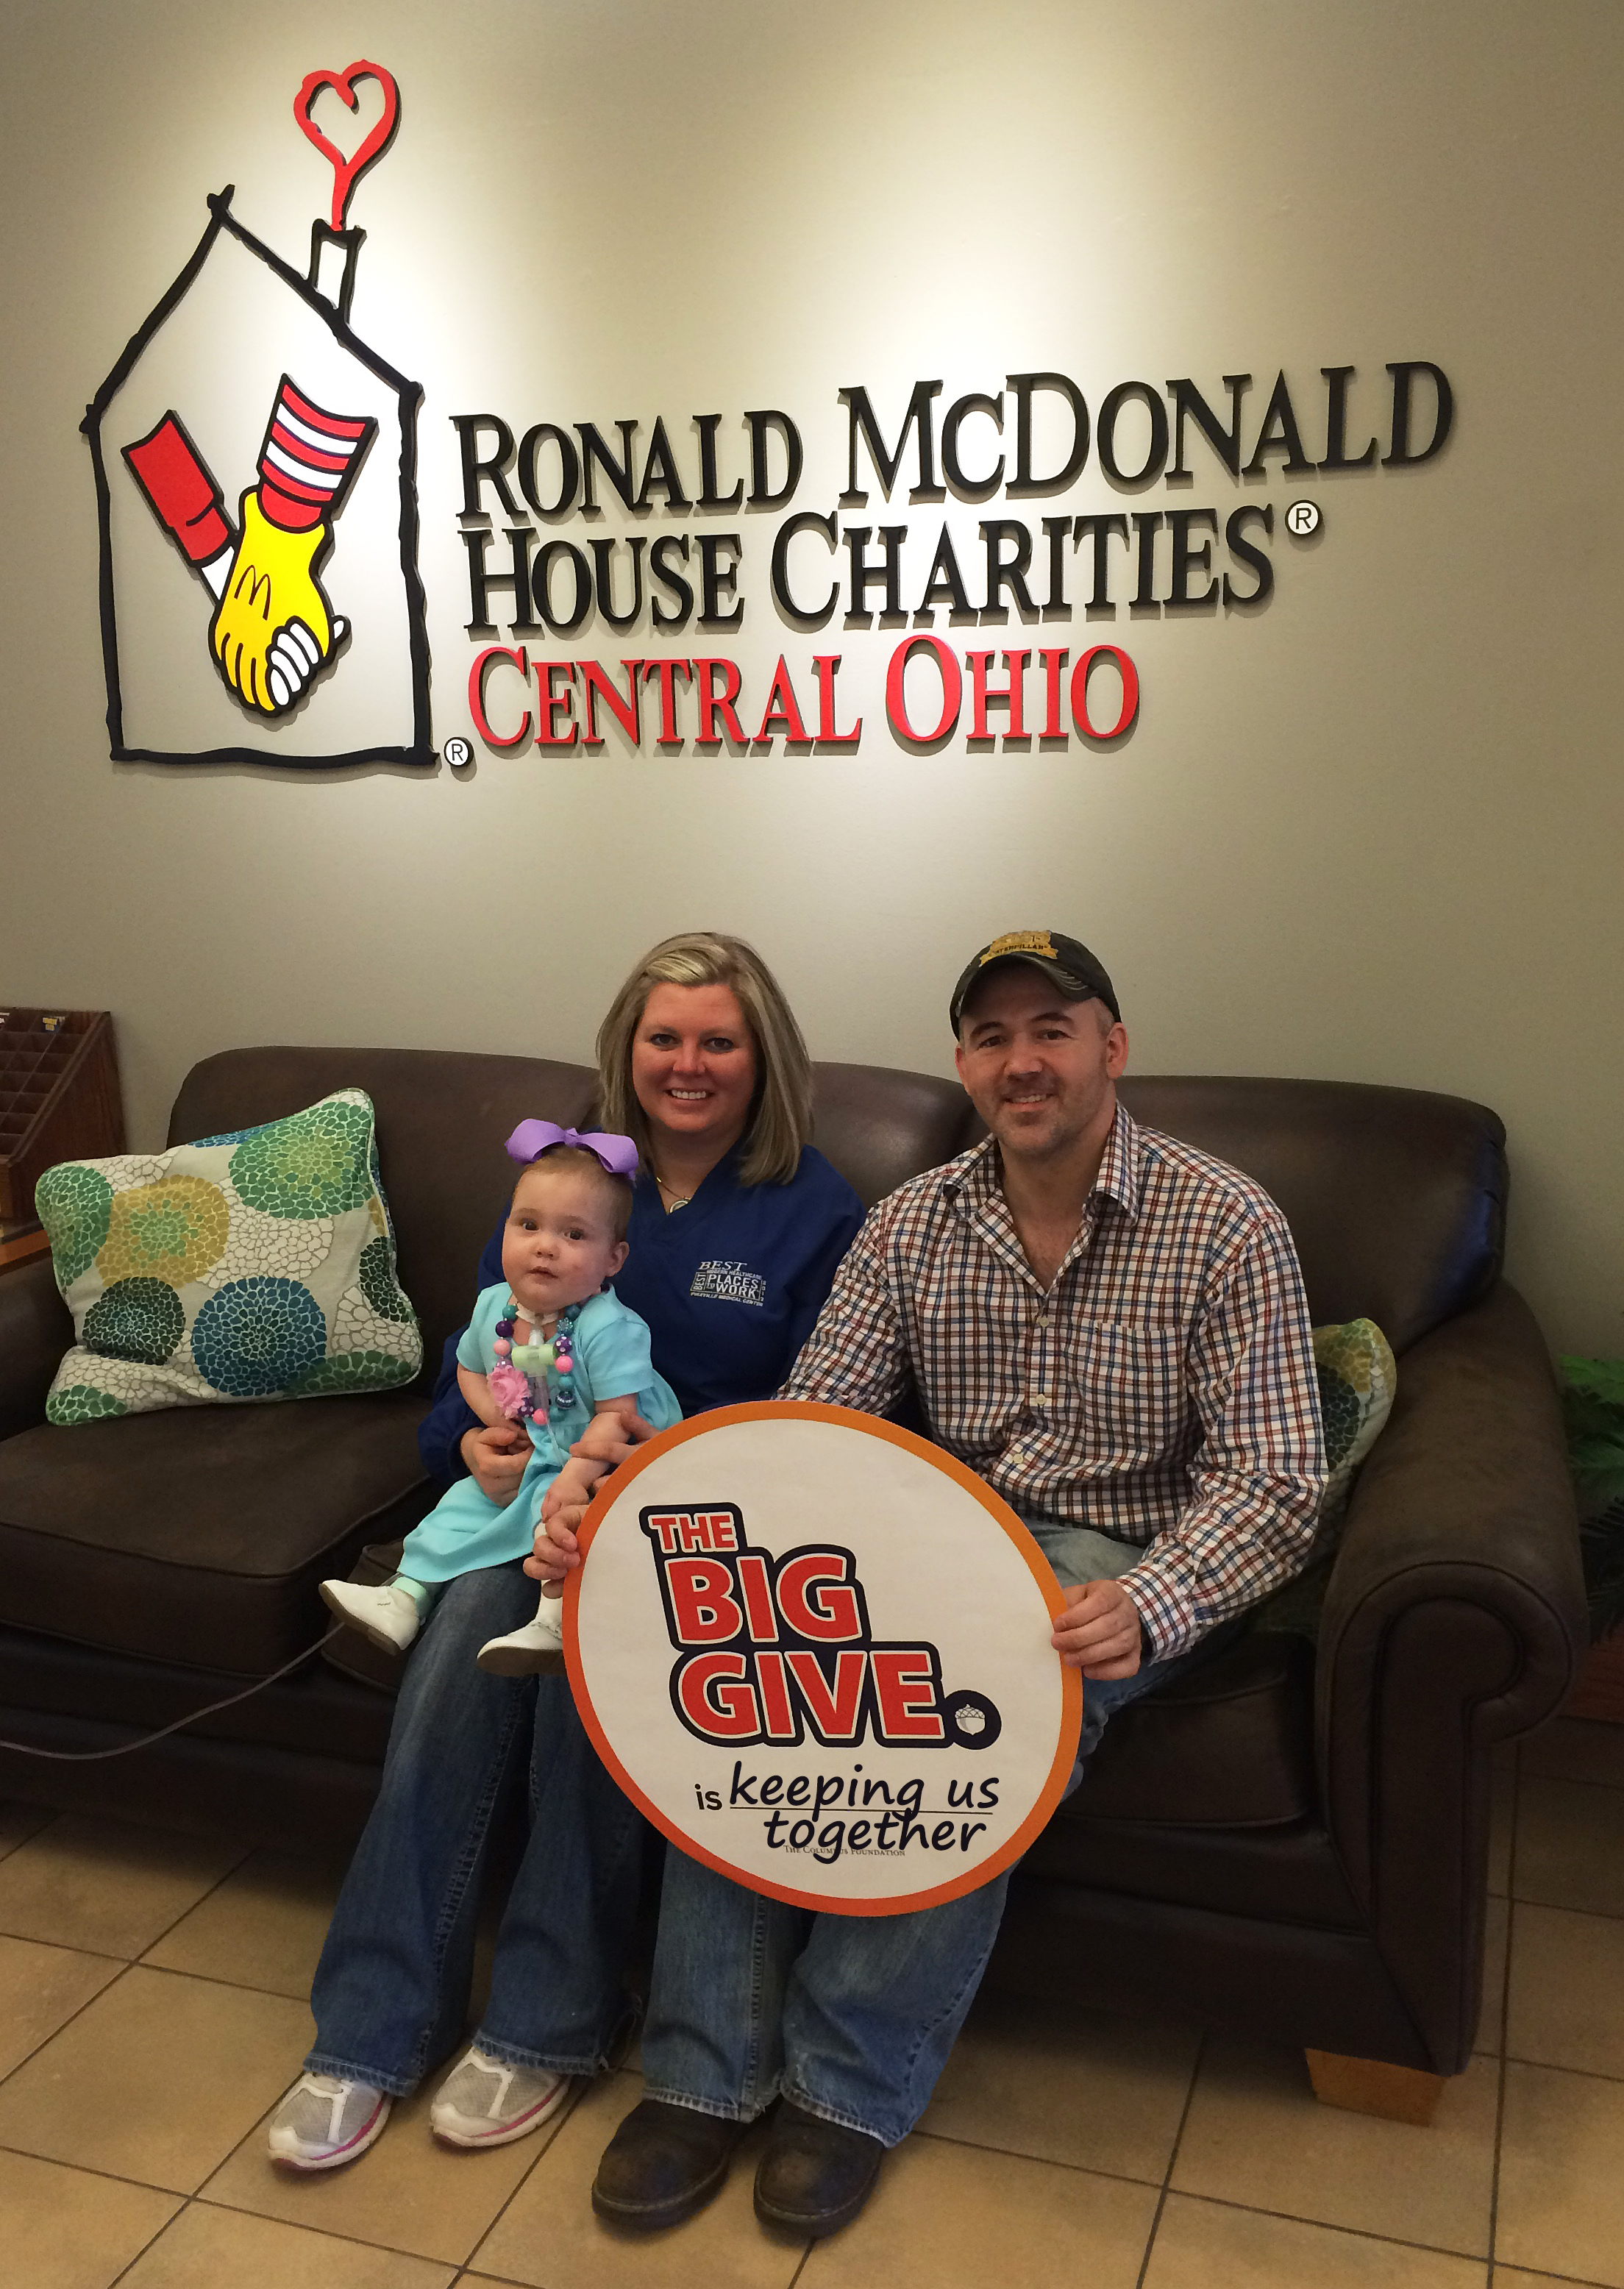 A Tale Of Two Ronald Mcdonald Houses Ronald Mcdonald House Charities Of Central Ohio